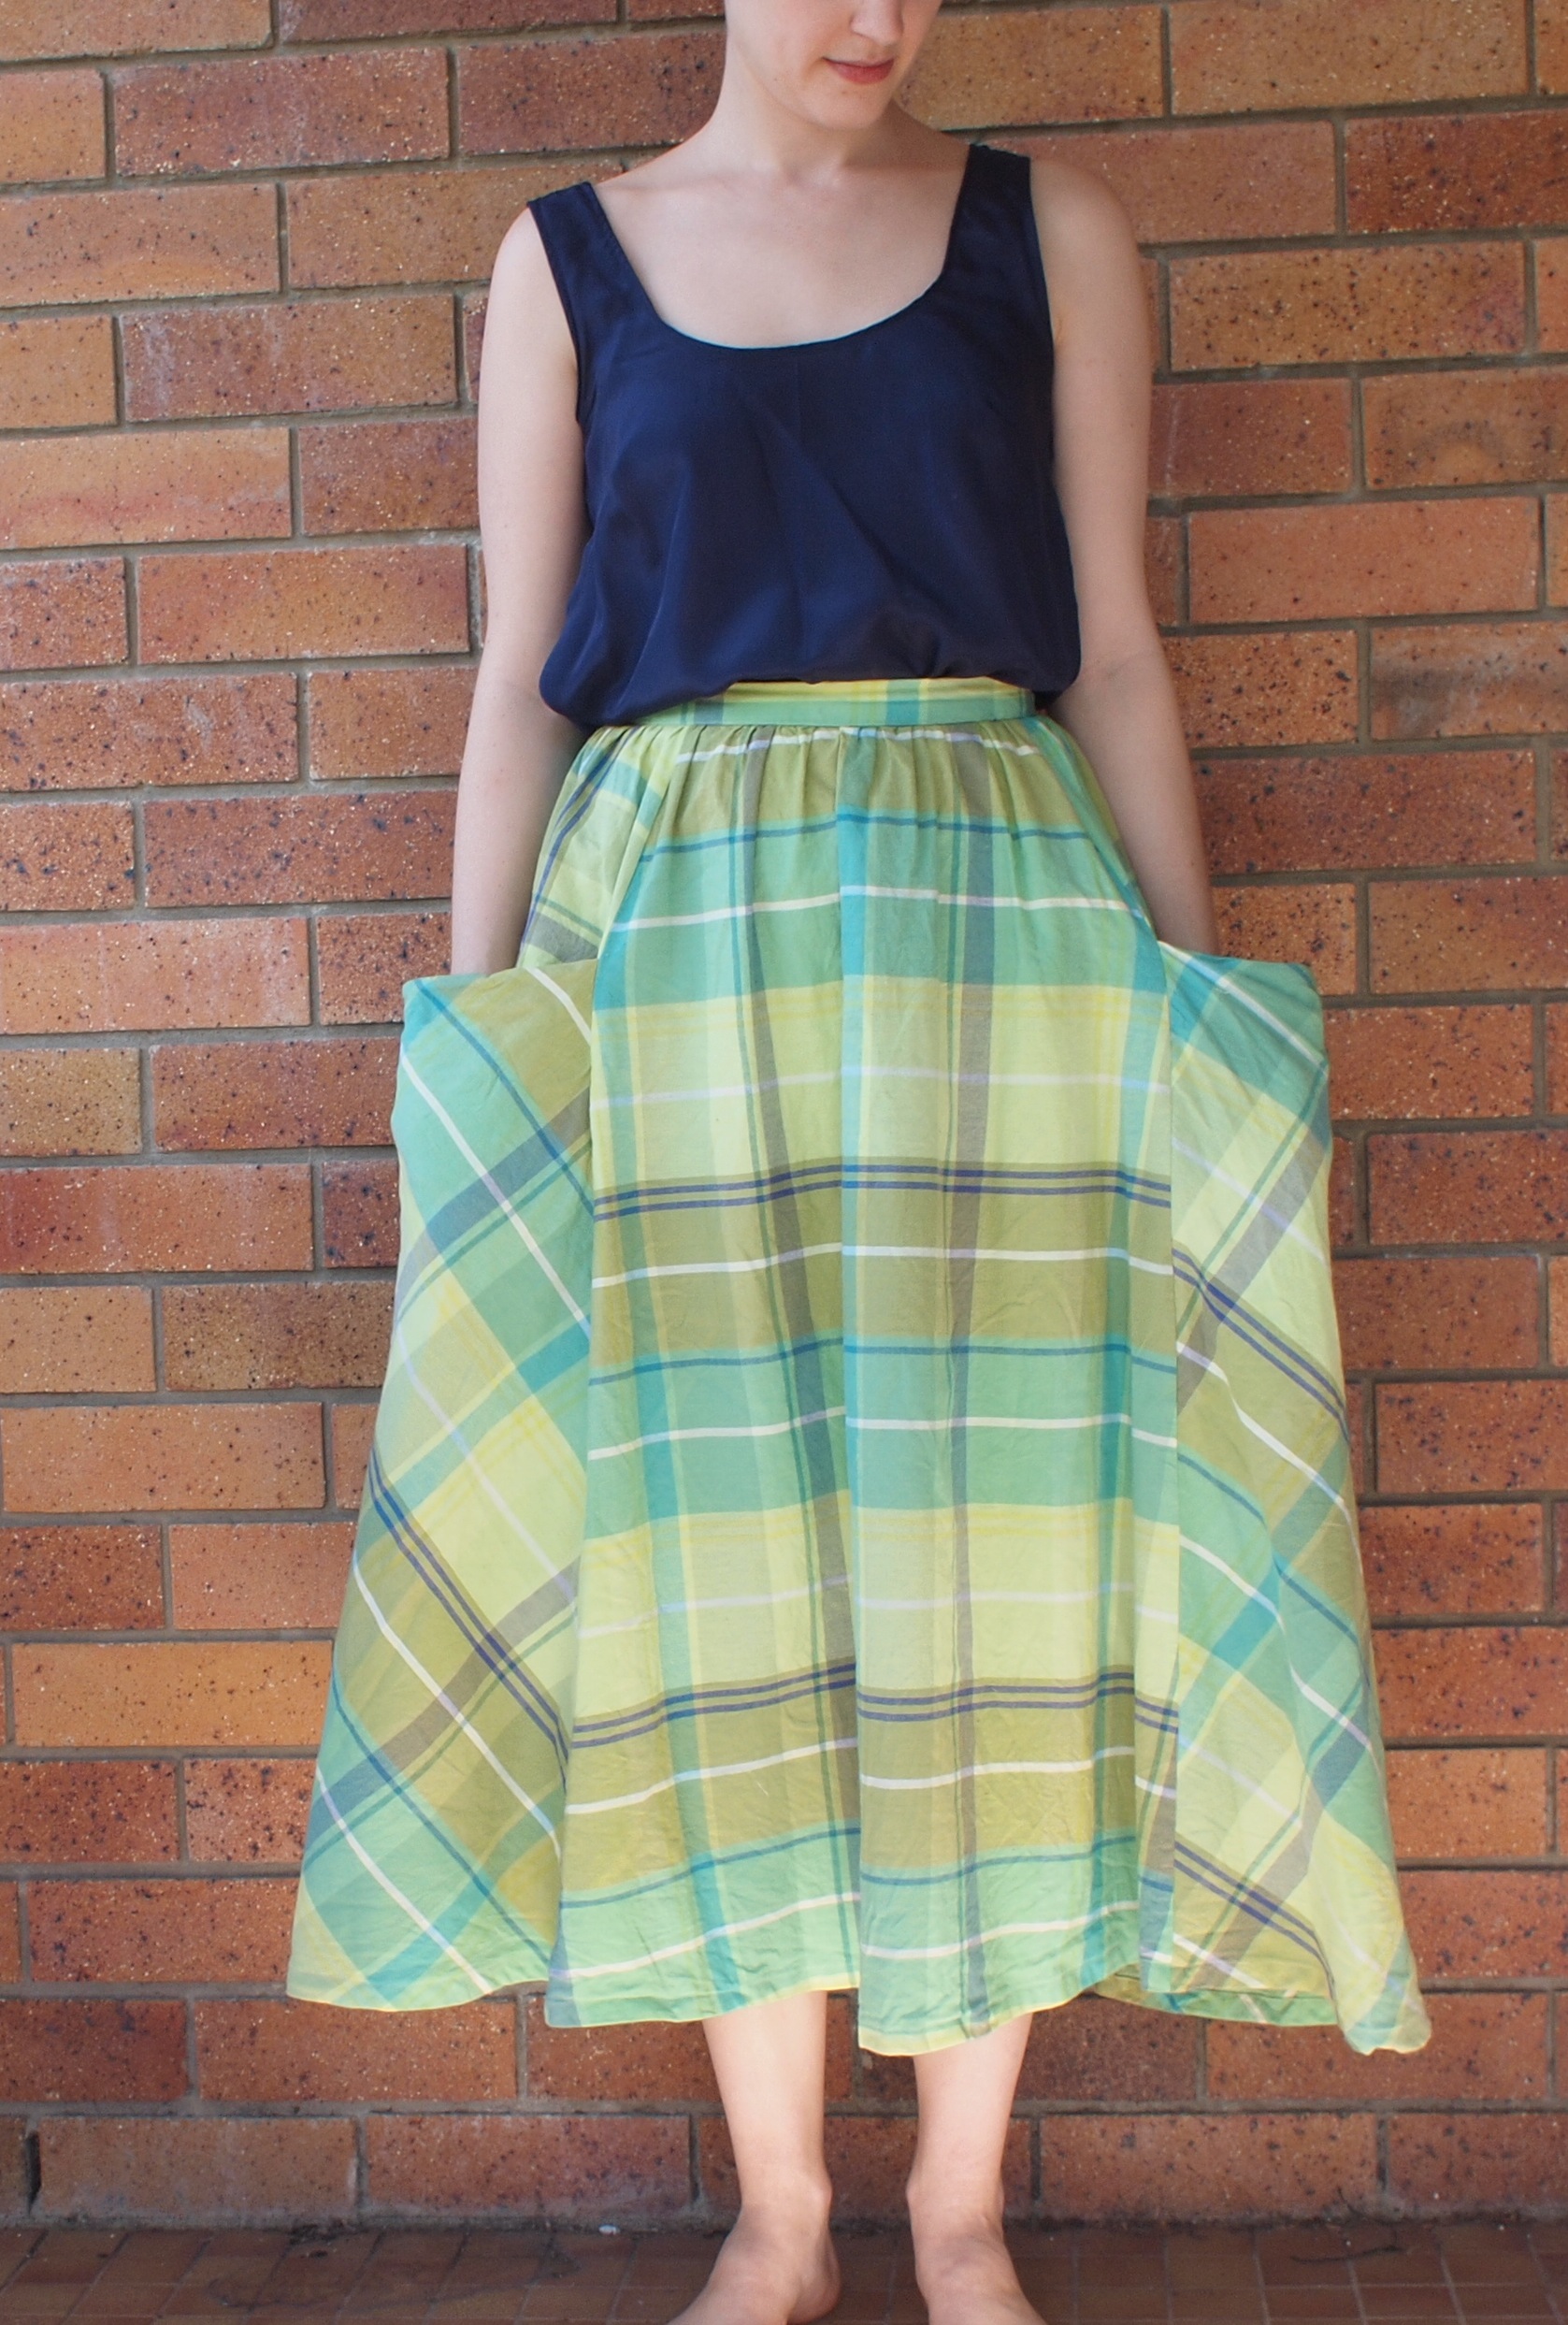 Picnic Blanket Skirt Sewing Projects